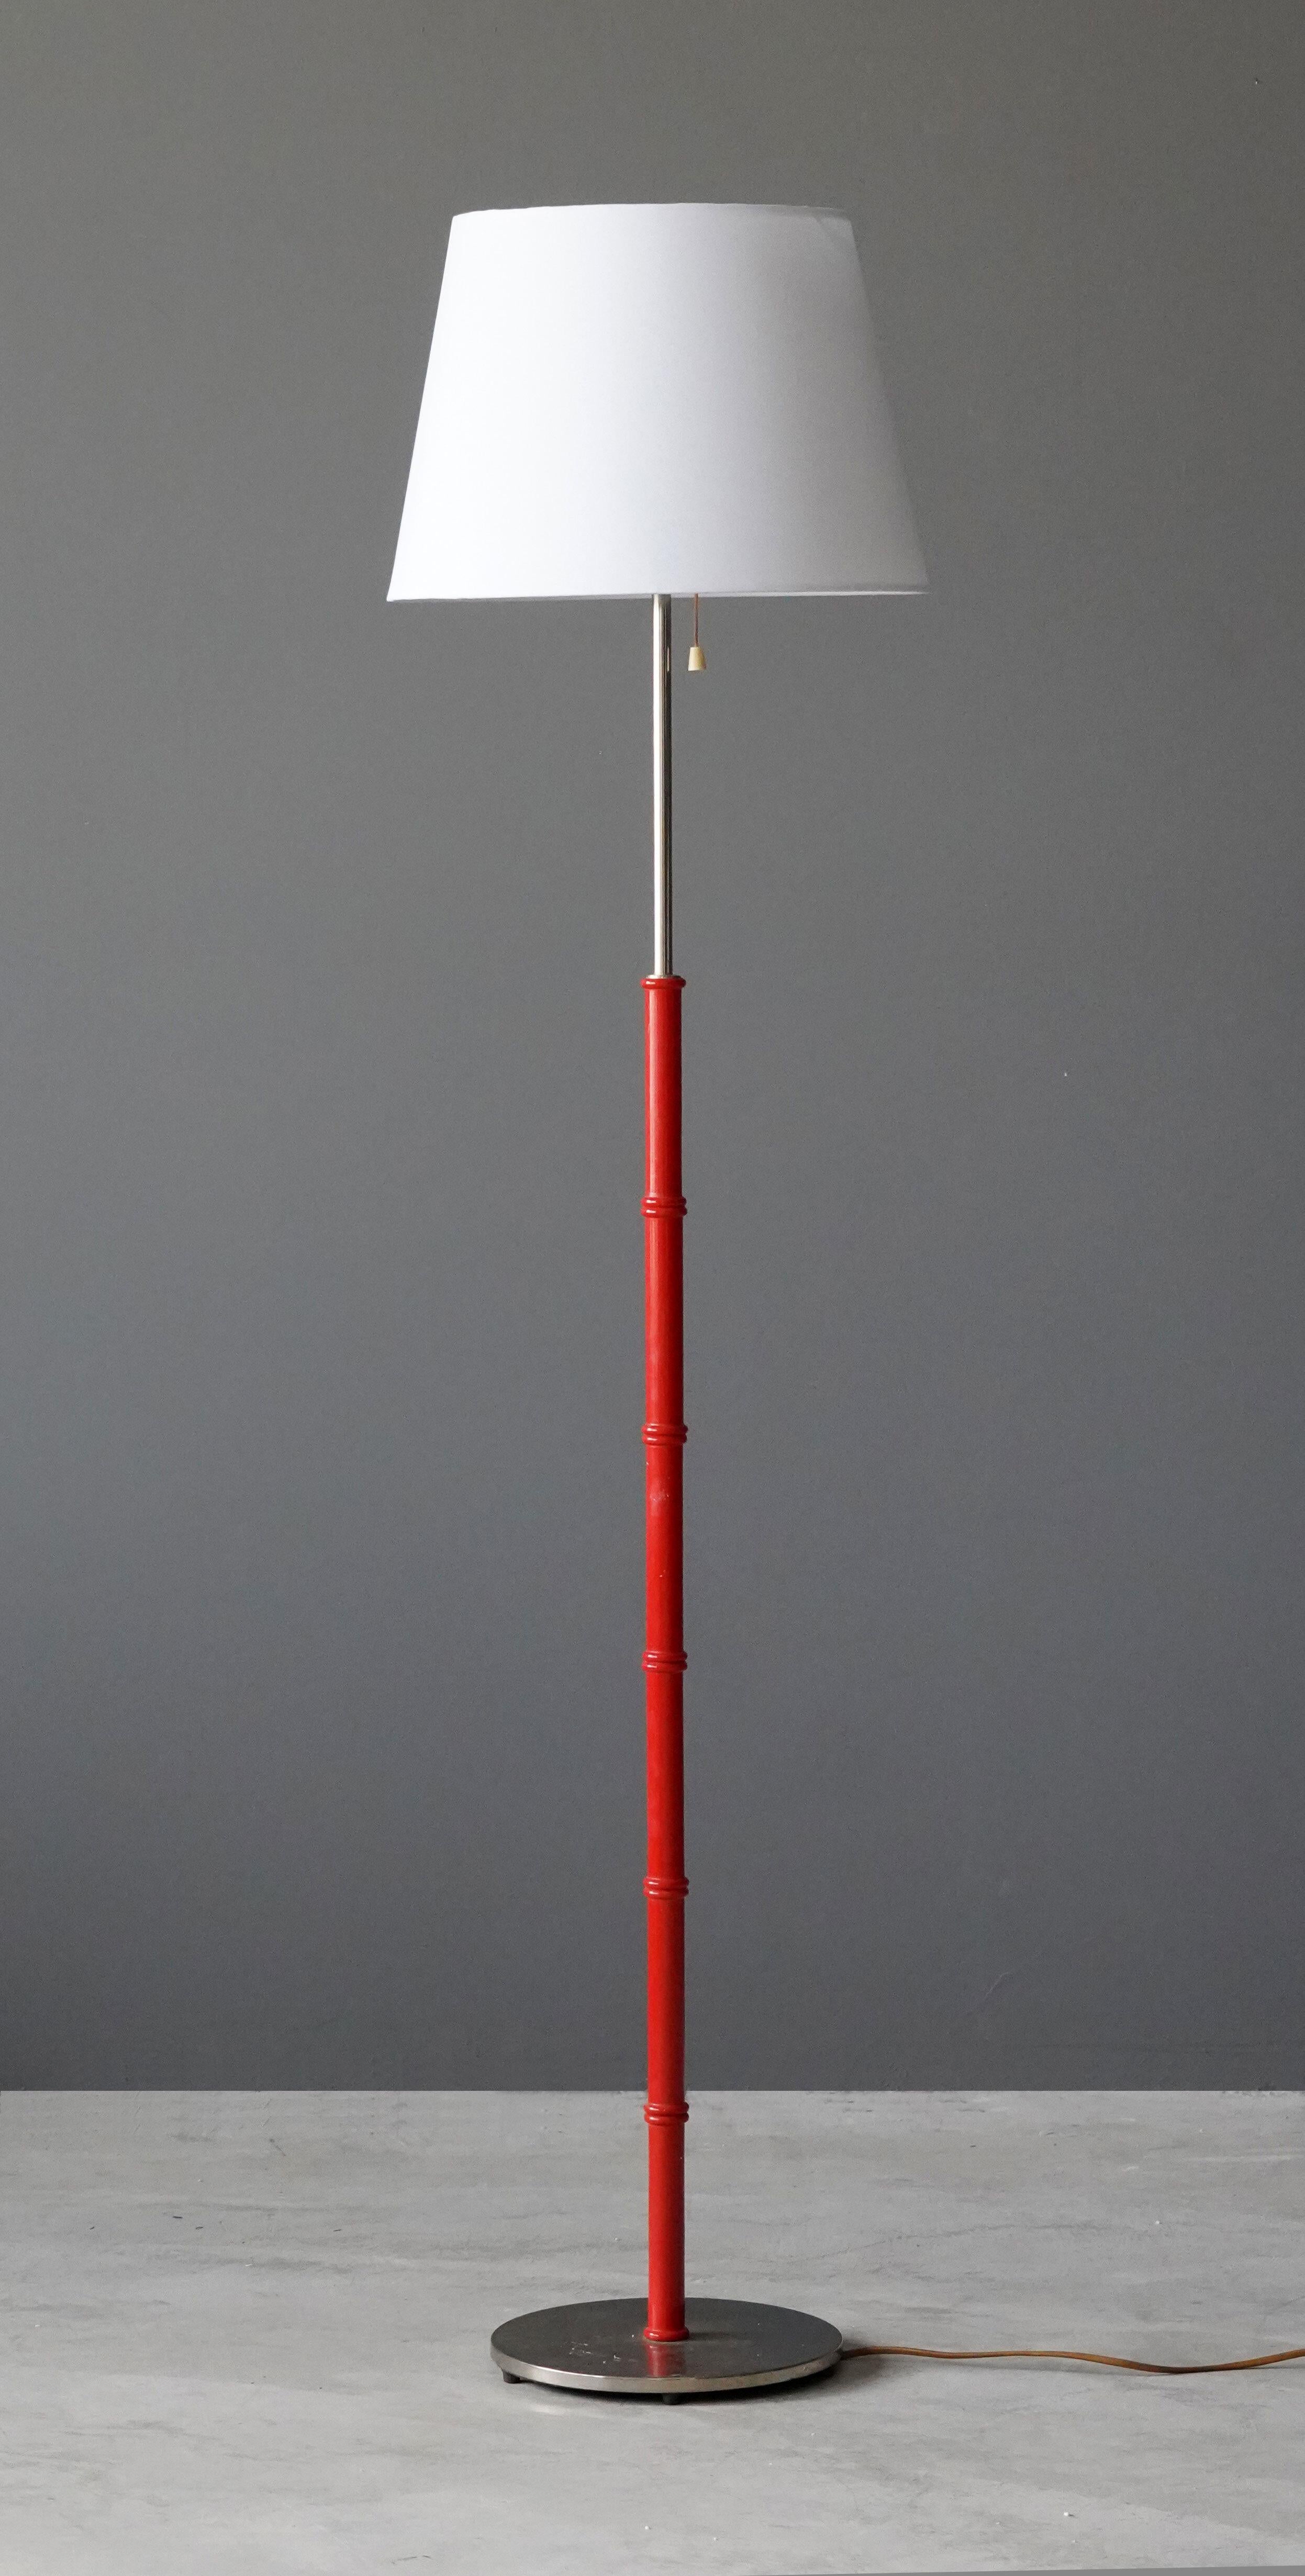 A all-original functionalist floor lamp. Produced by Falkenbergs Belysning. Stamped

Sold without lampshade. Stated dimensions excluding the lampshade.

Other designers of the period include Hans Bergström, Hans-Agne Jacobson, Alvar Aalto, Josef